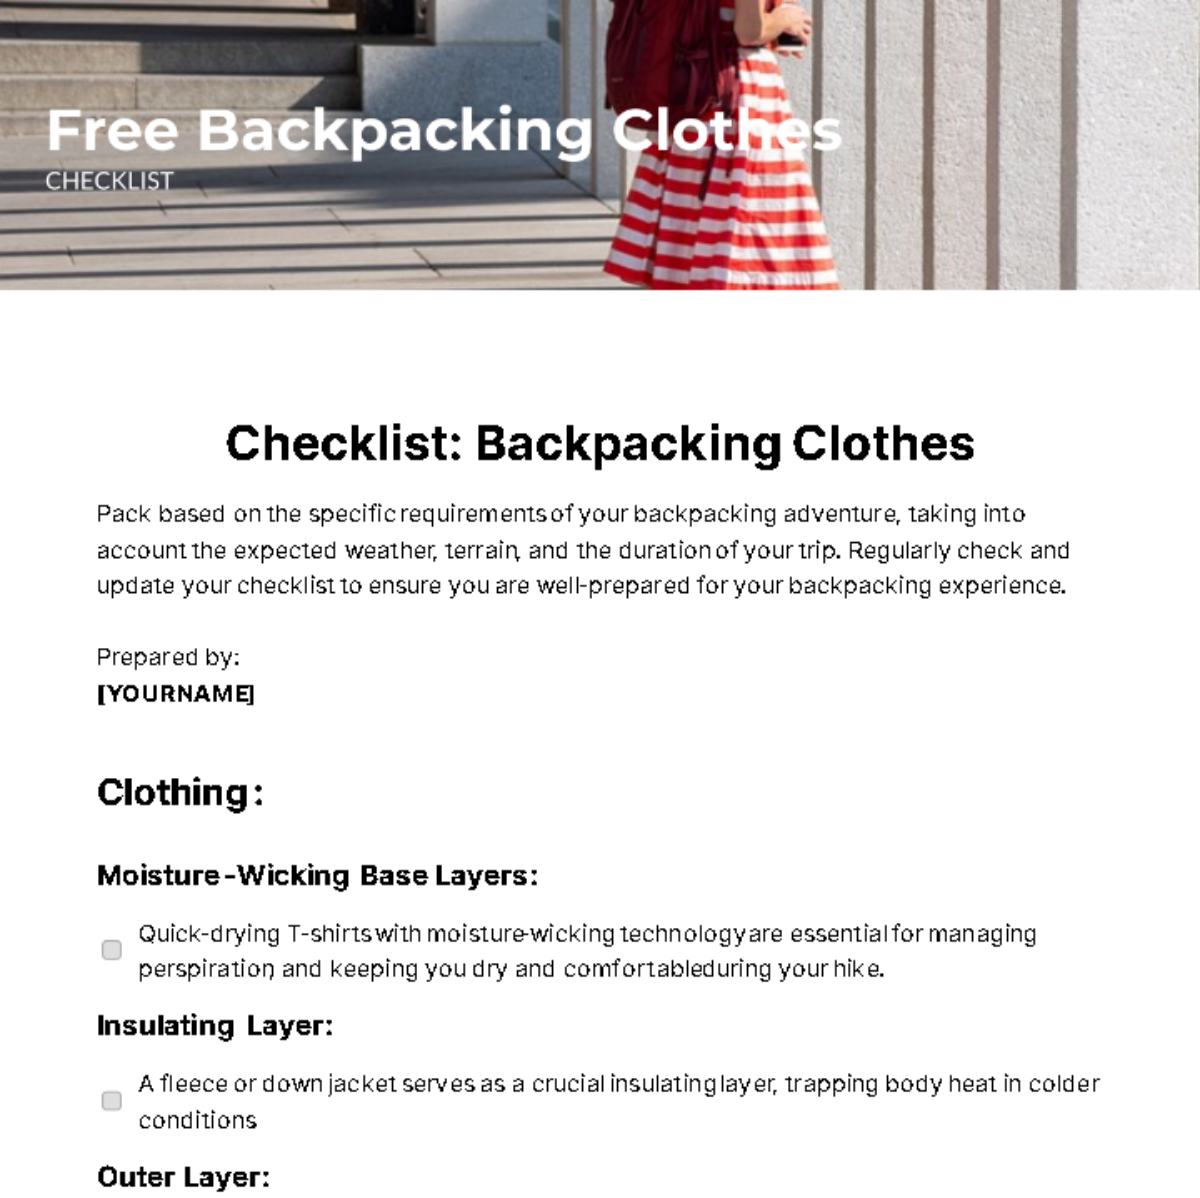 Free Backpacking Clothes Checklist Template